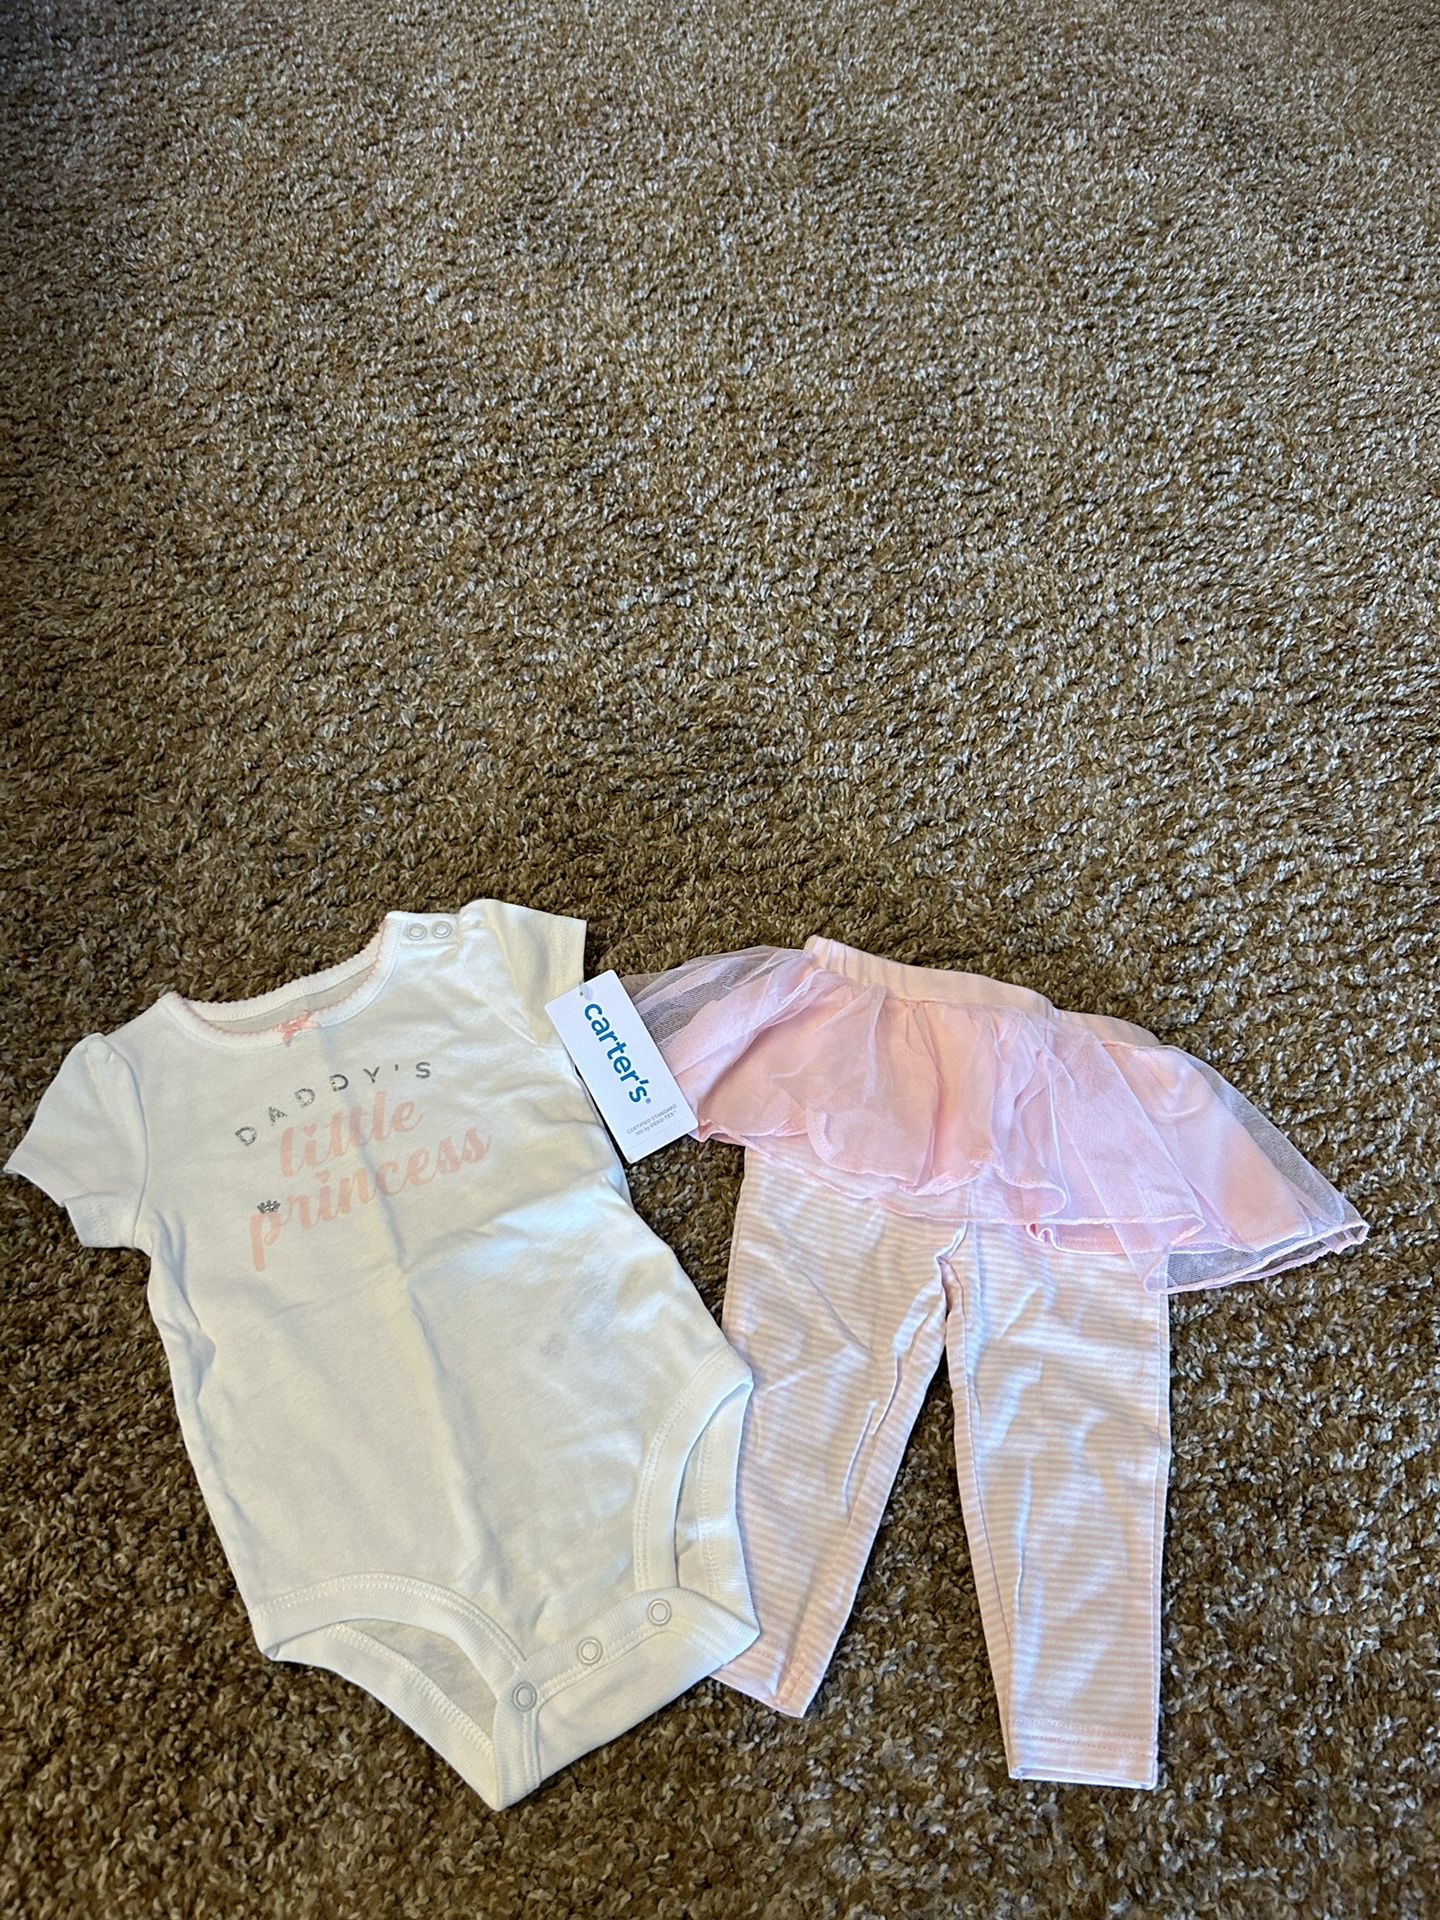 Little Girls, Size 6 Months, Daddy's Little Princess Outfit